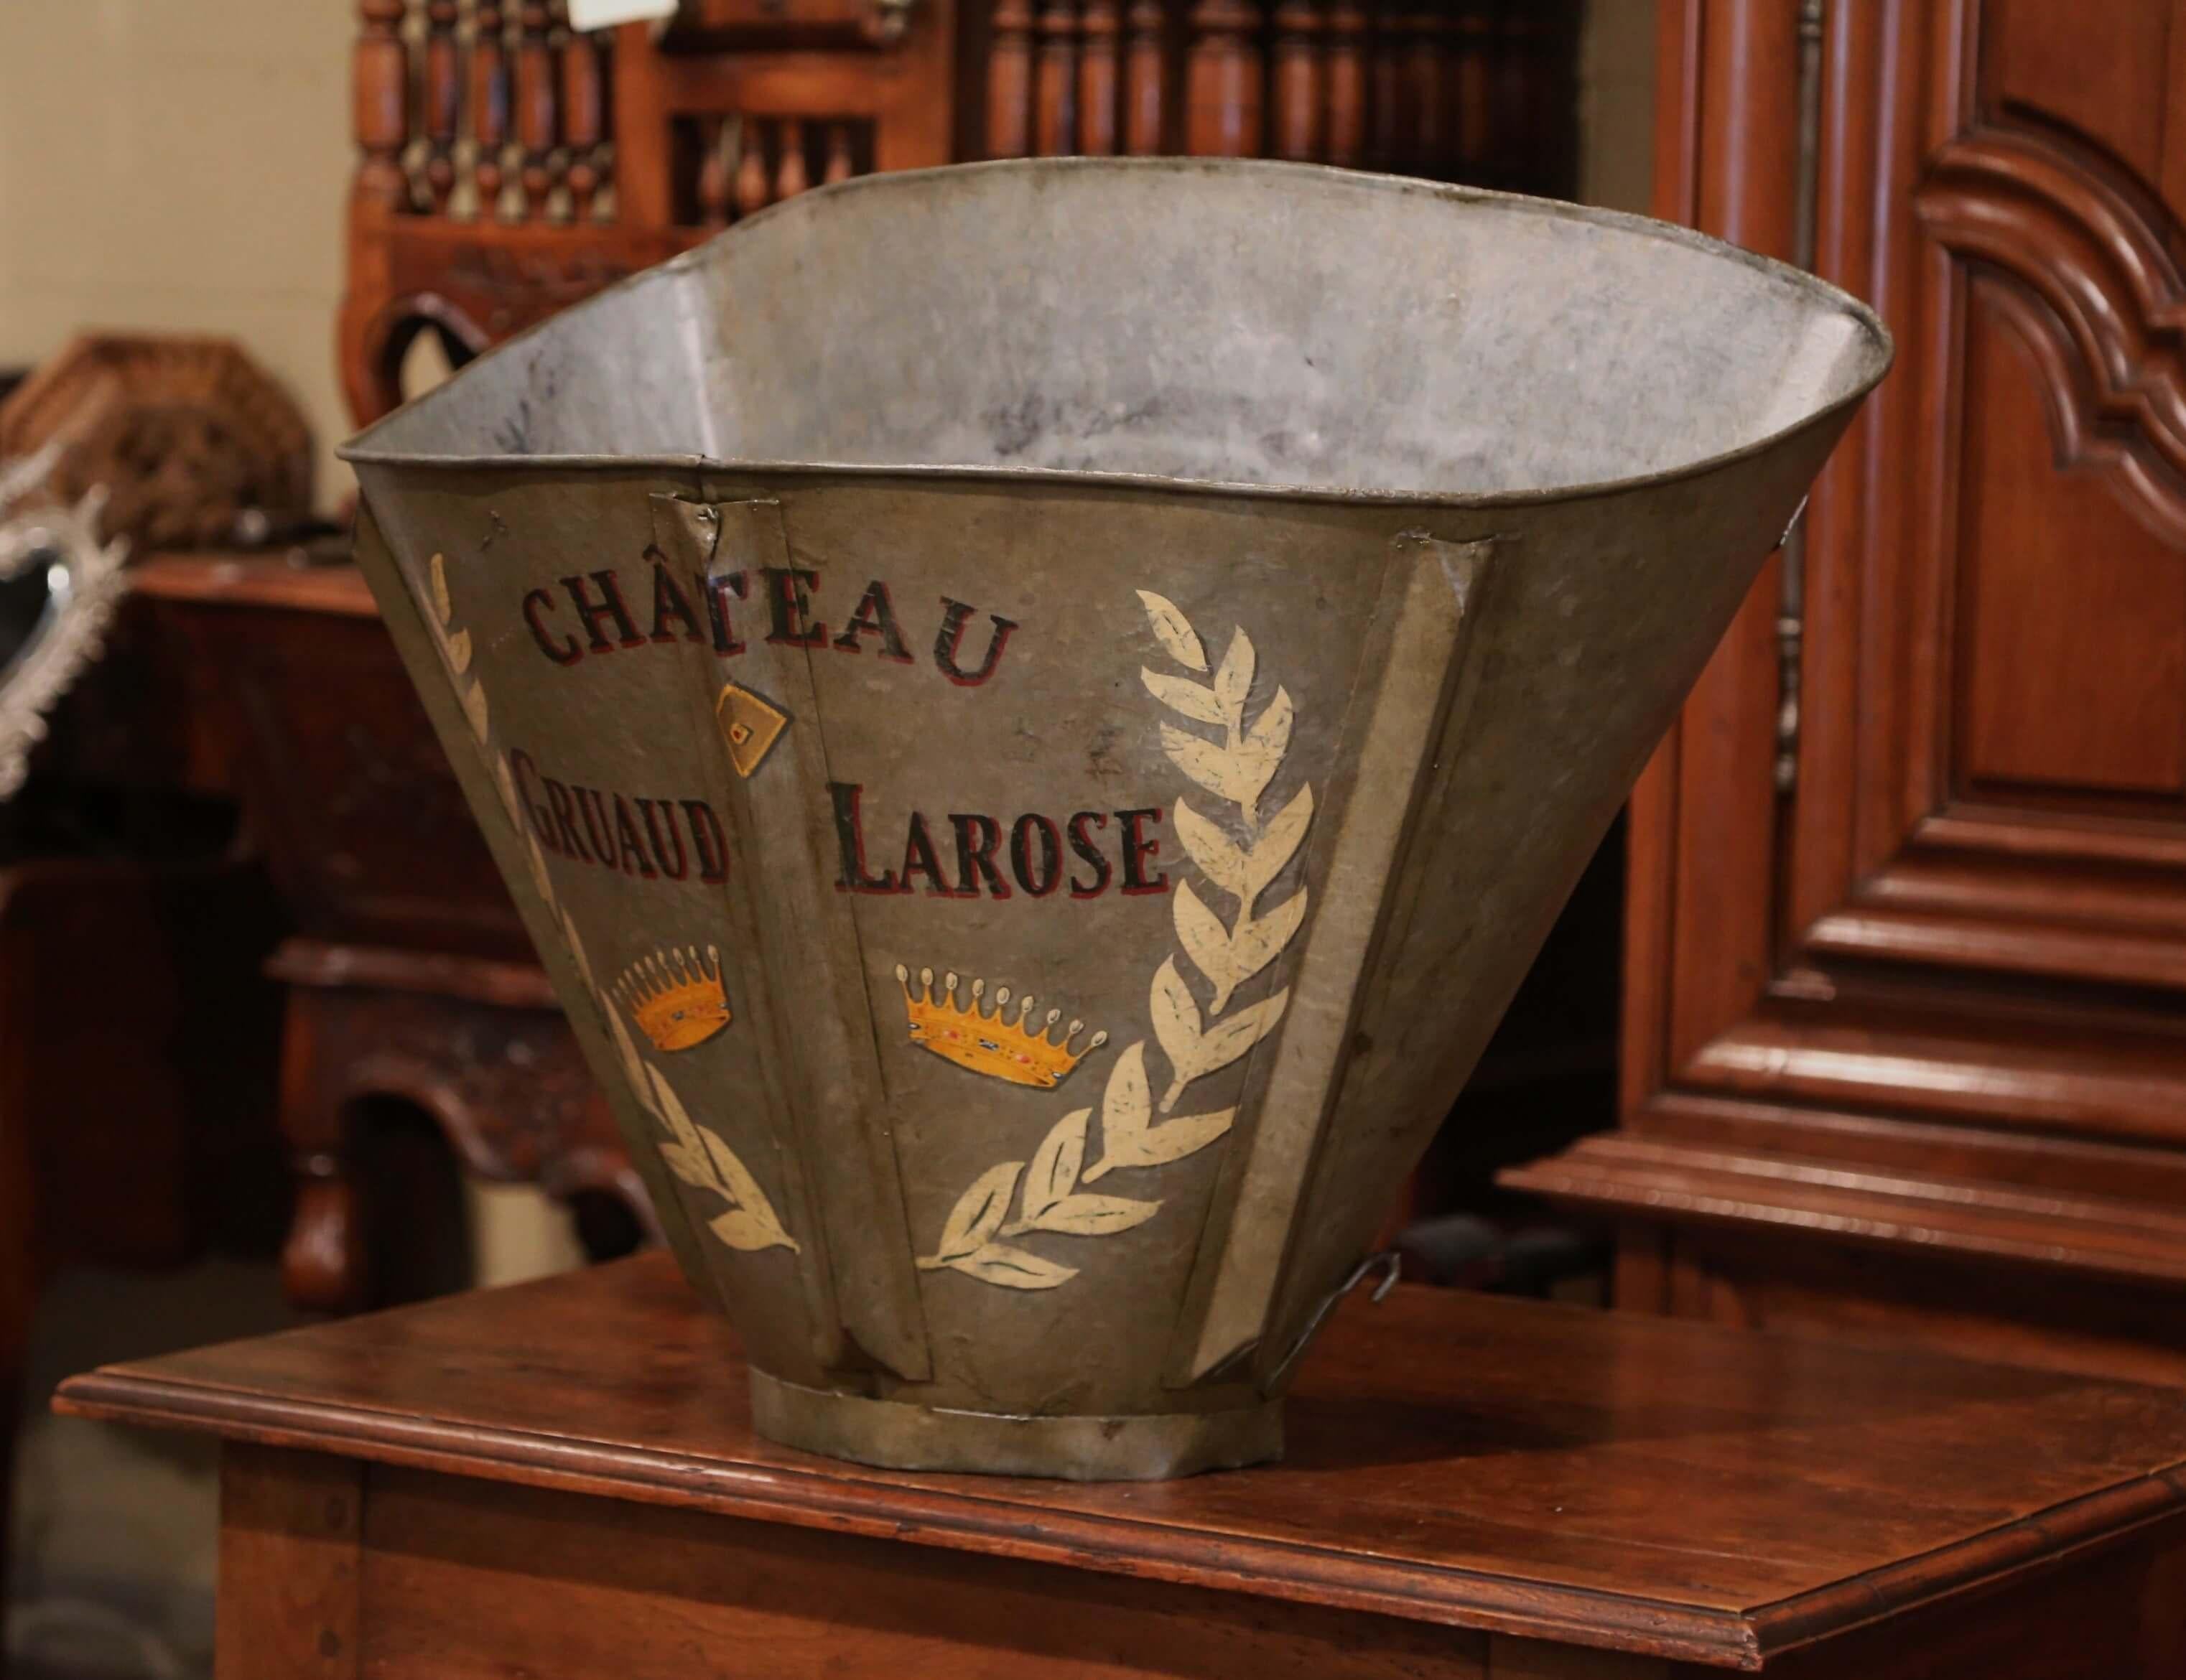 Decorate a wine cellar with this antique, metal grape harvest basket. Created in Southwest, France circa 1870, the unique basket has its original leather back straps and is hand-painted with colorful leaf and crown decor, including 